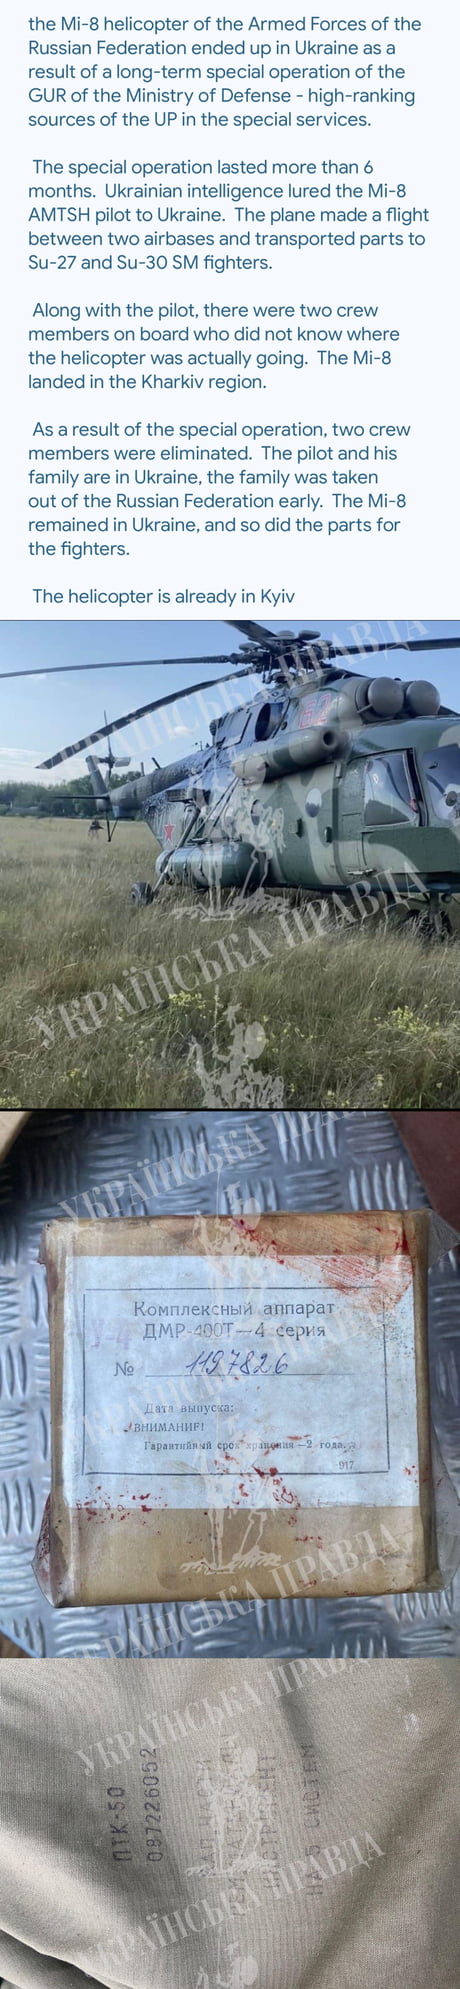 And here are the details of the special operation to hijack a Russian helicopter